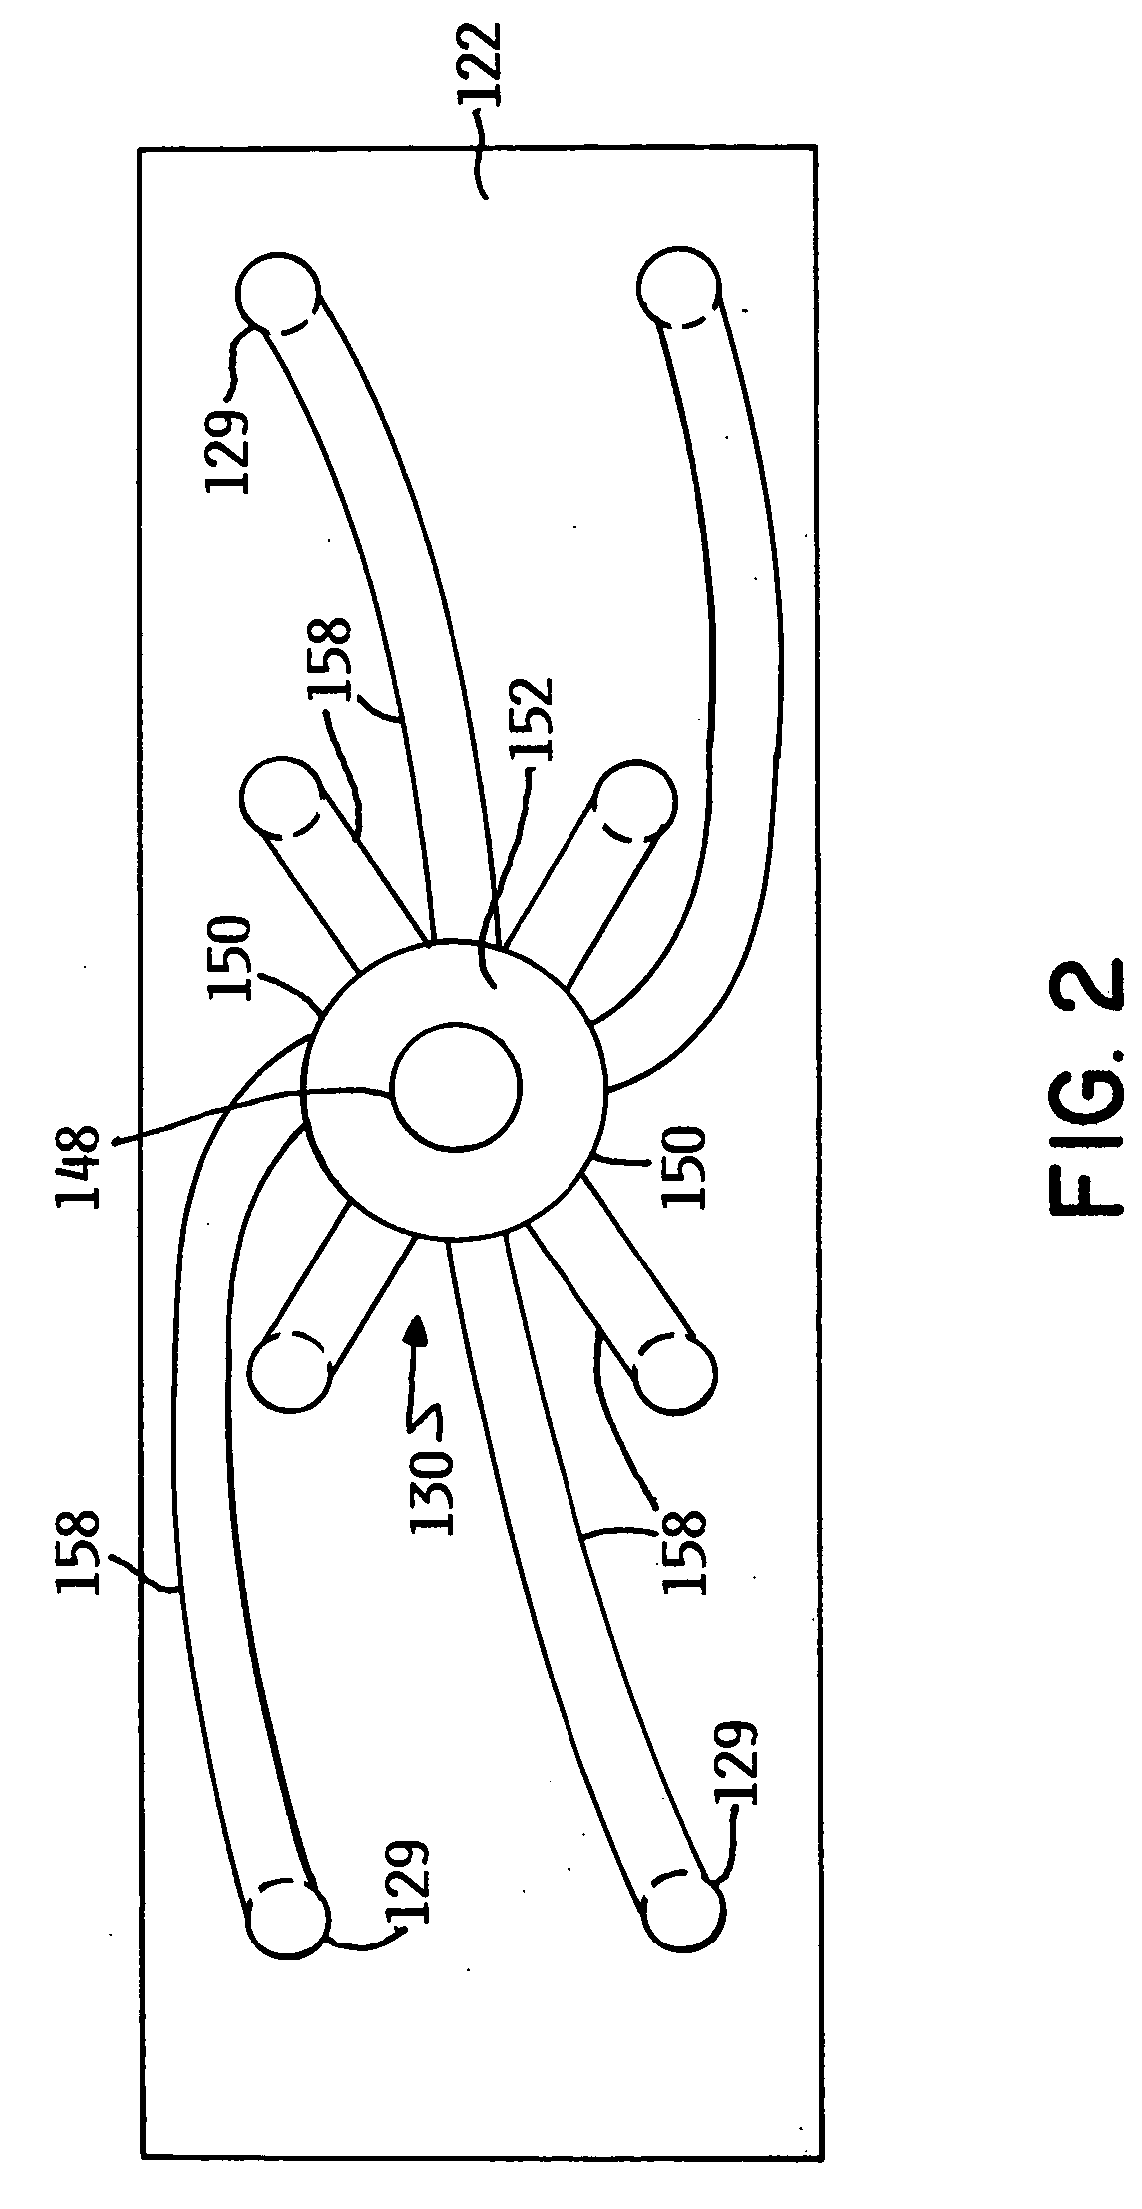 Solder reflow system and method thereof